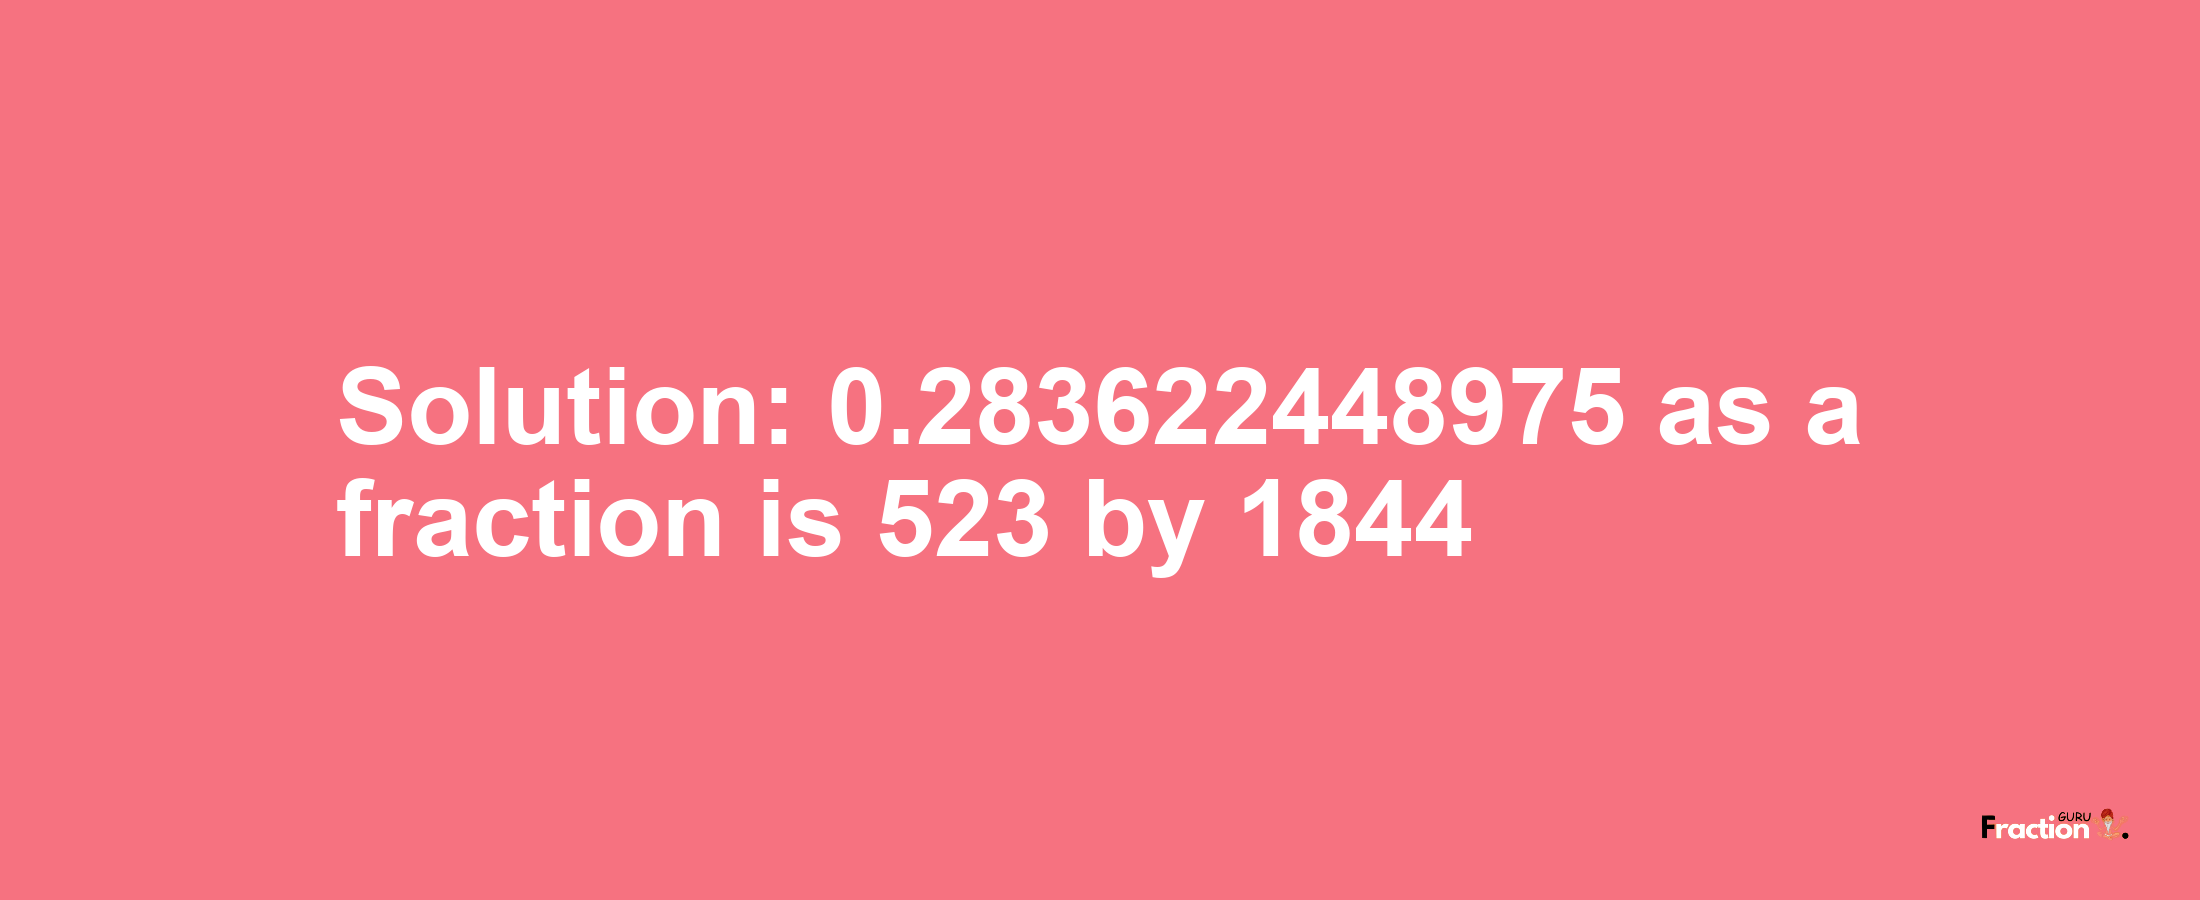 Solution:0.283622448975 as a fraction is 523/1844